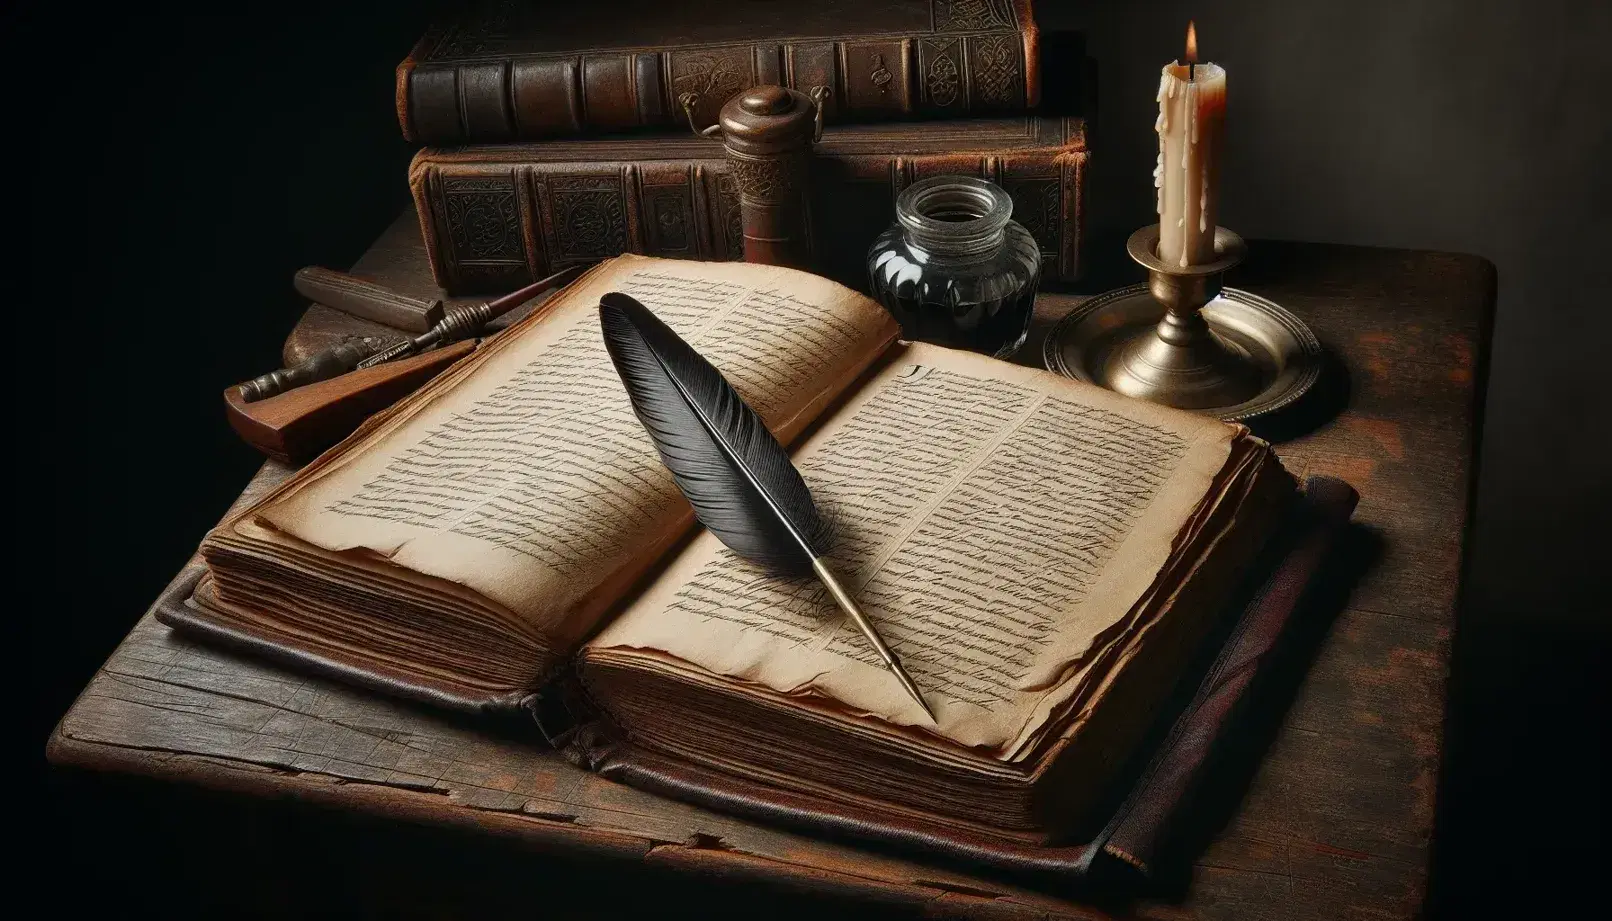 Open antique book on wooden table with yellowed pages and black quill pen, brass inkwell and unlit candle on dark background.